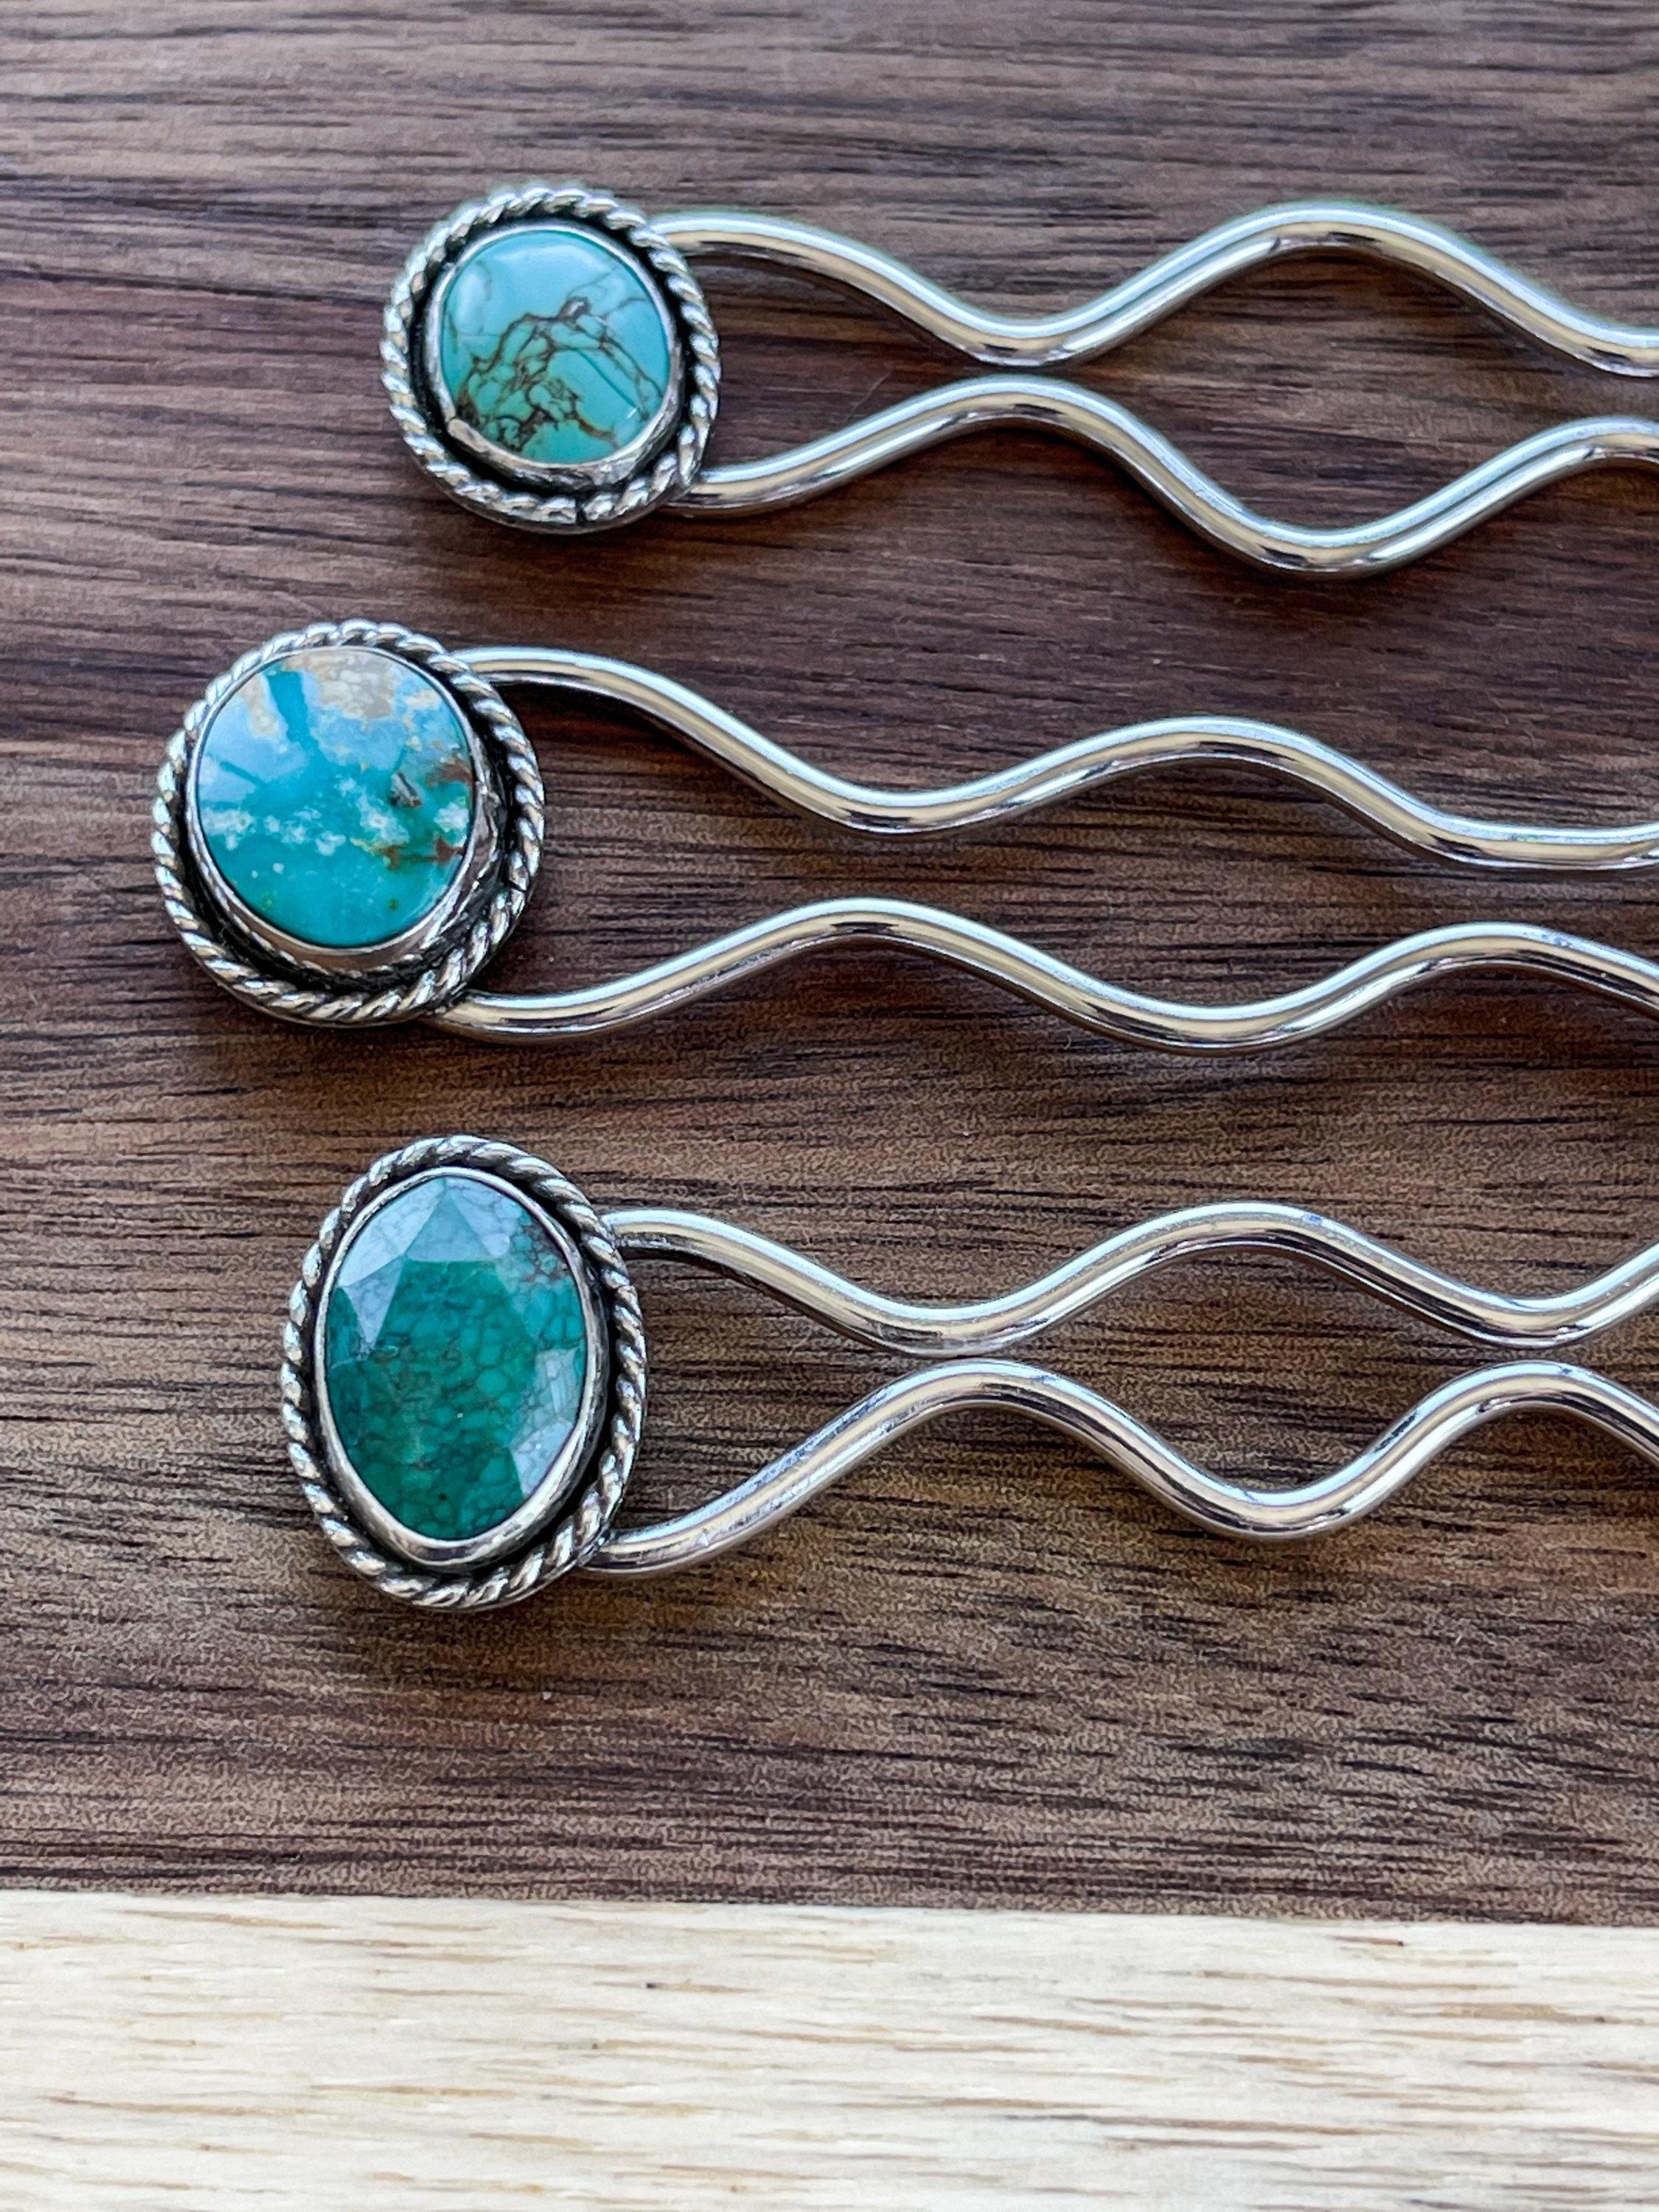 ---> The Haute Bohemian Jewelry Hair Accessories // Red River Turquoise Sterling Silver "Mini" Hair Fork/Pin 3 3/4” Accessoires Haaraccessoires Haarspelden 